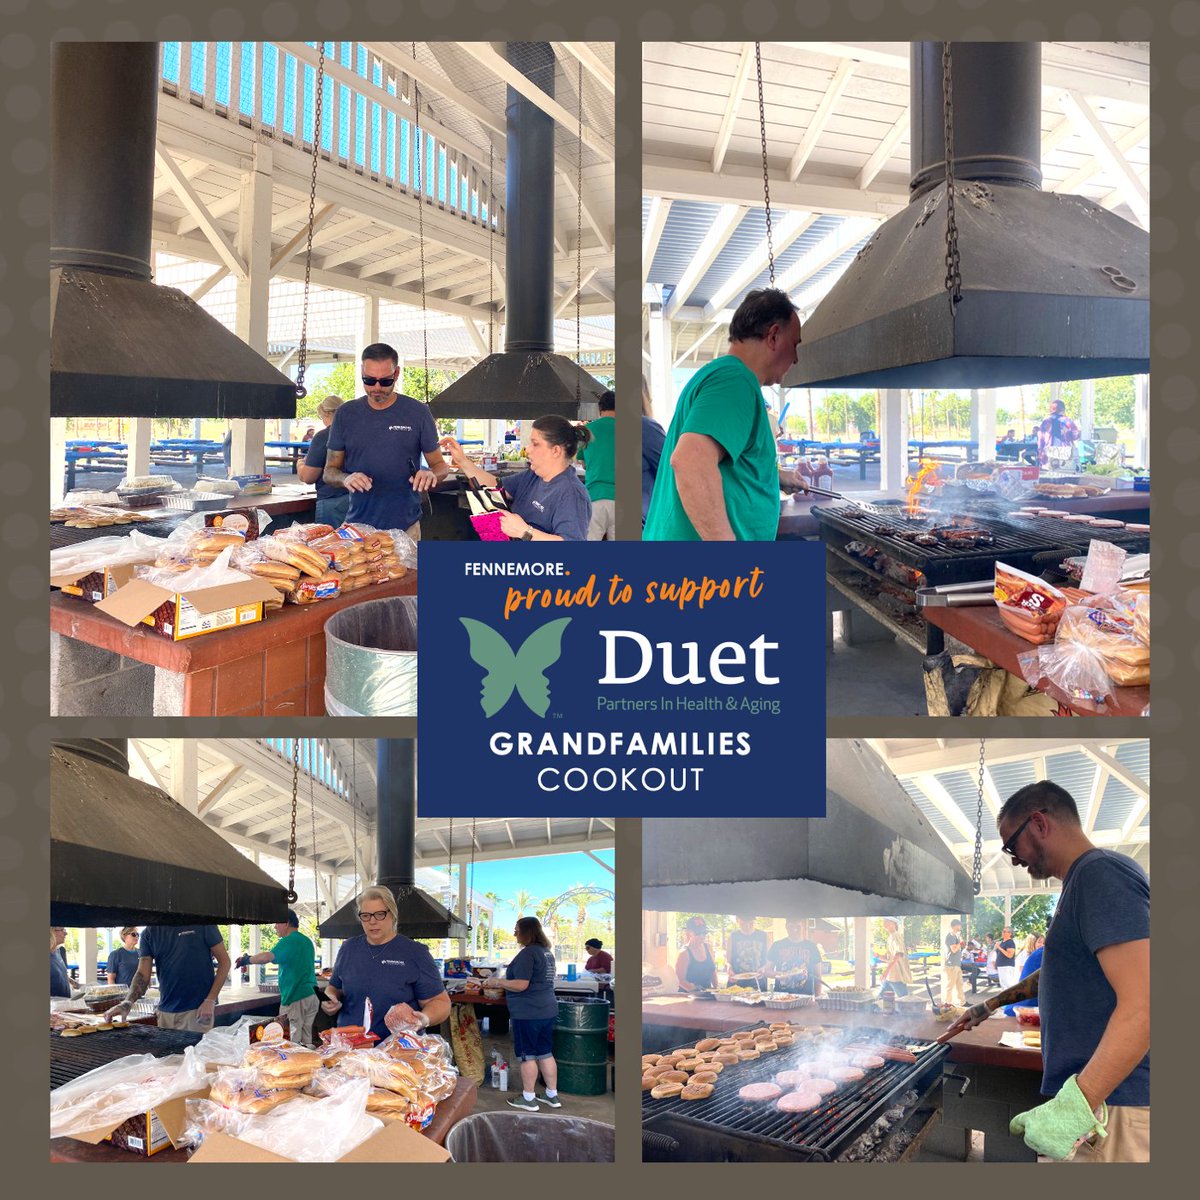 This past weekend, Karin Lombardi and a team of Fennemoids volunteered at the @duetaz's Grandparents Raising Grandchildren Picnic! Fennemore served as a sponsor for the fun-filled afternoon. More about @duetaz: ow.ly/tff650Q2HaU

#Duets #GrandFamilies #Fennemore #Picnic